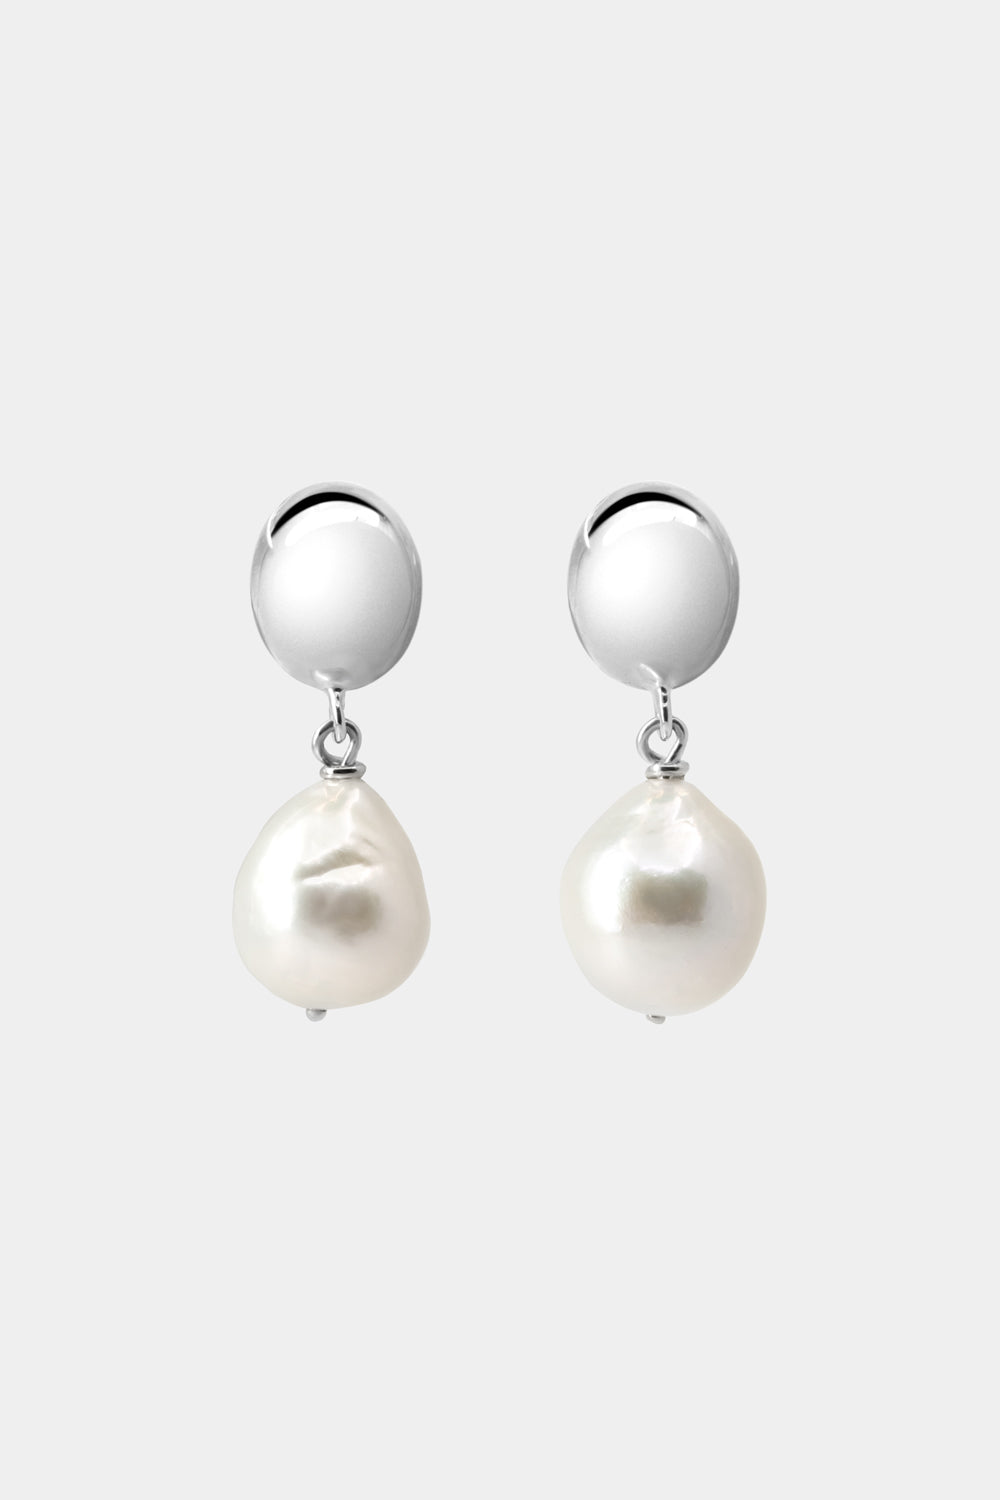 Vivienne Baroque Pearl Earrings | Silver or 9K White Gold, More Options Available| Natasha Schweitzer